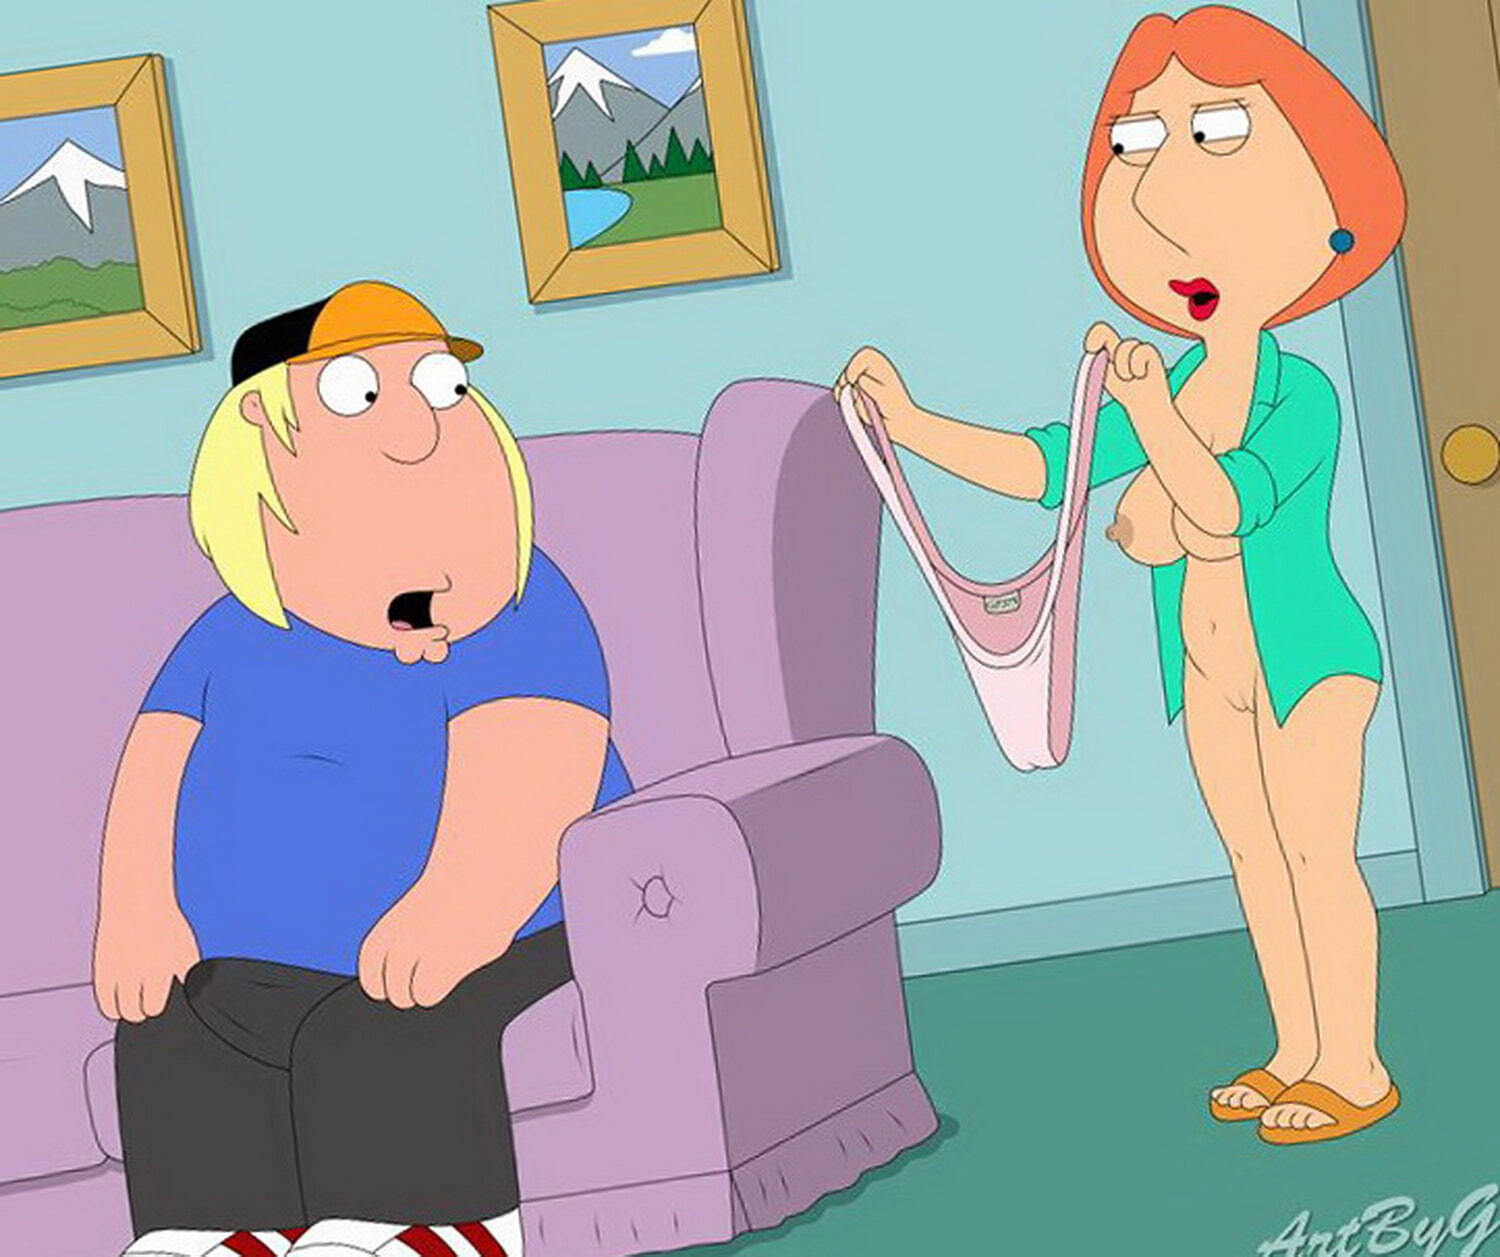 Lois griffin game